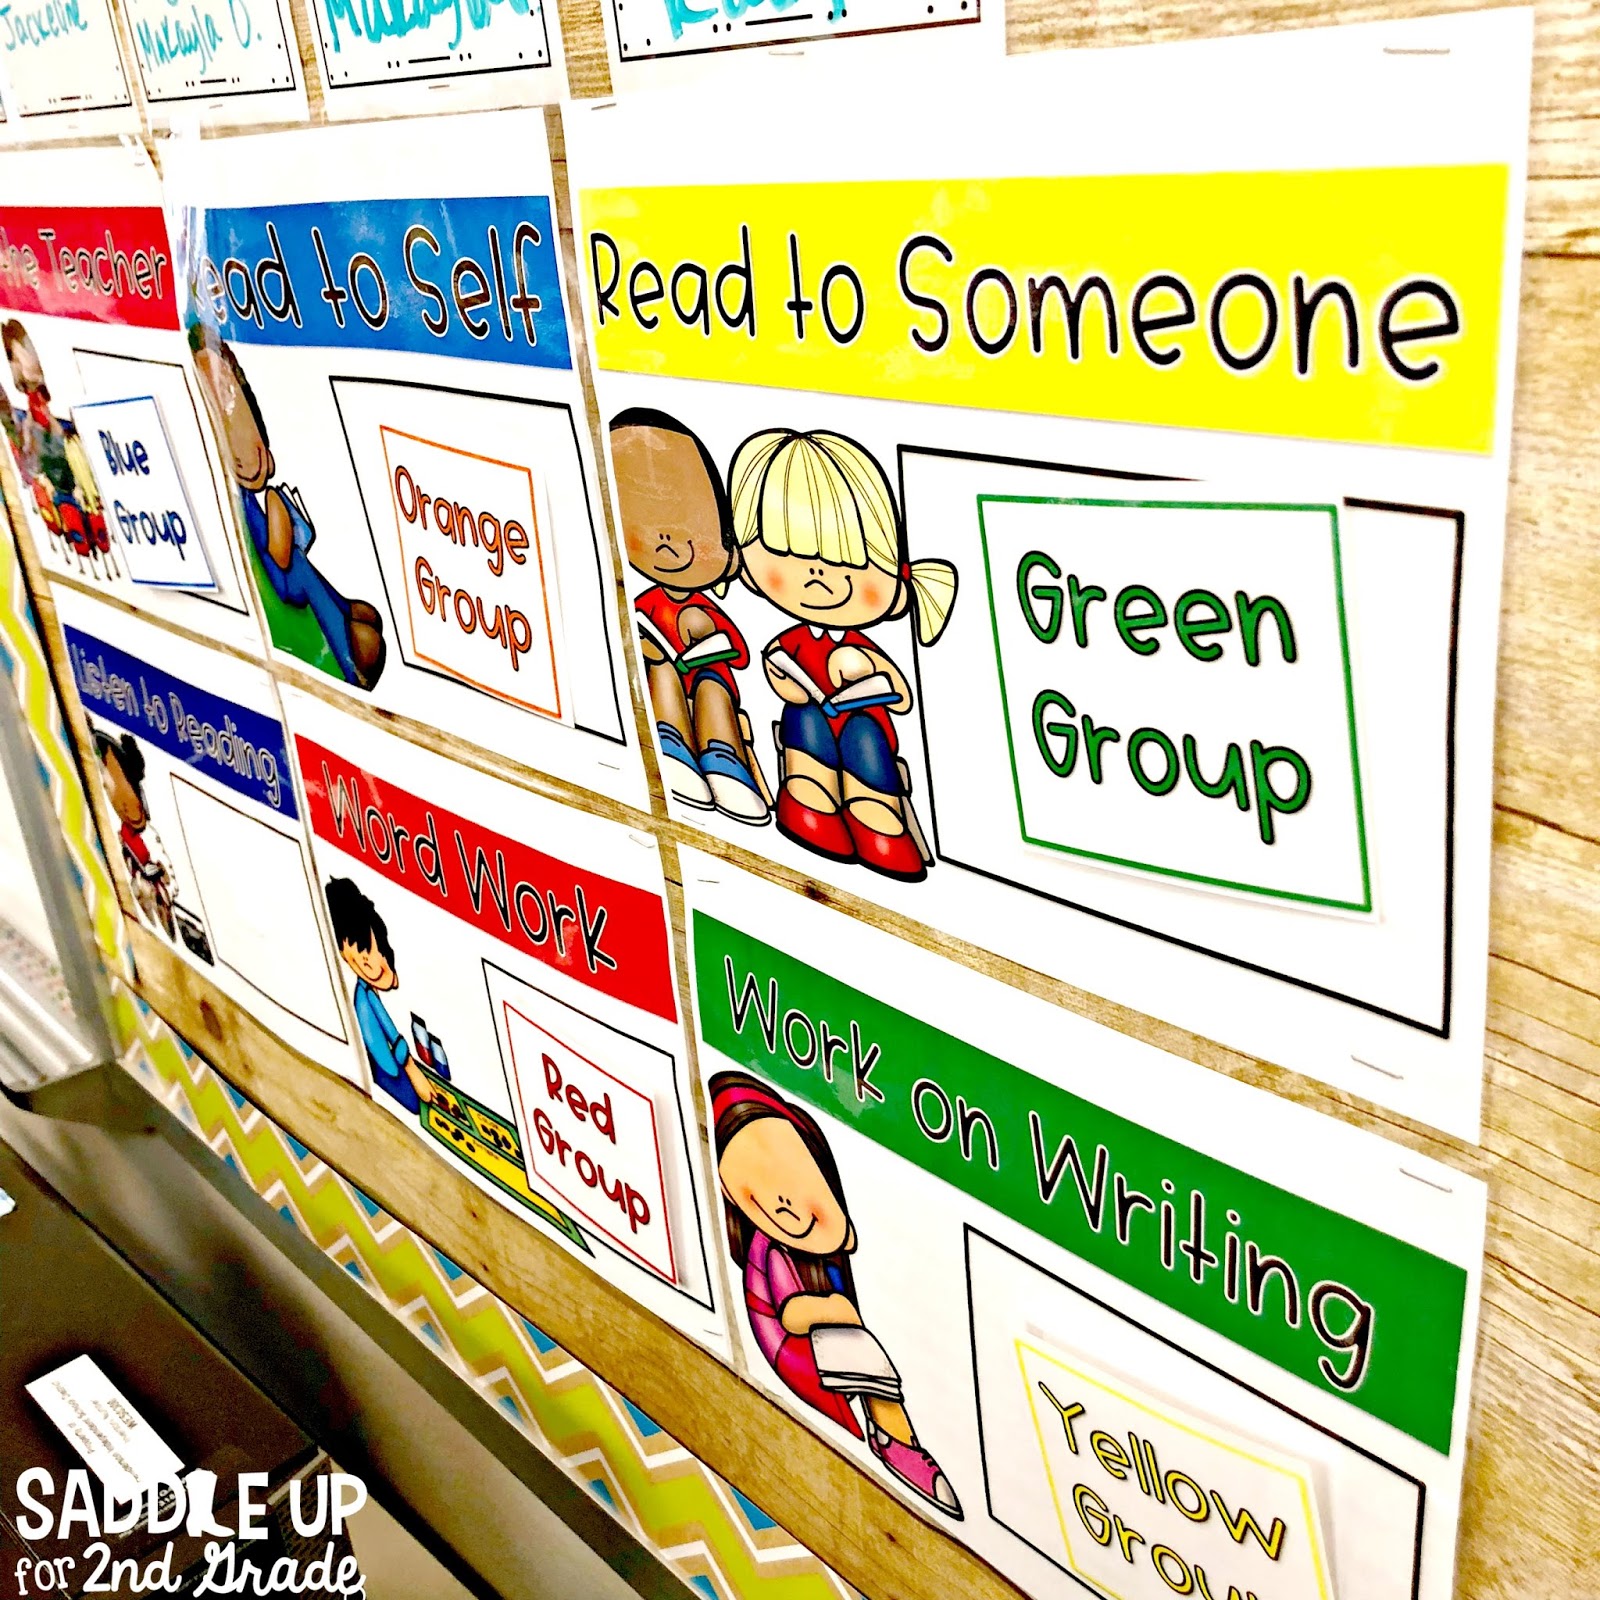 The blog posts features a tour of my 2nd grade classroom with a burlap and bright theme!